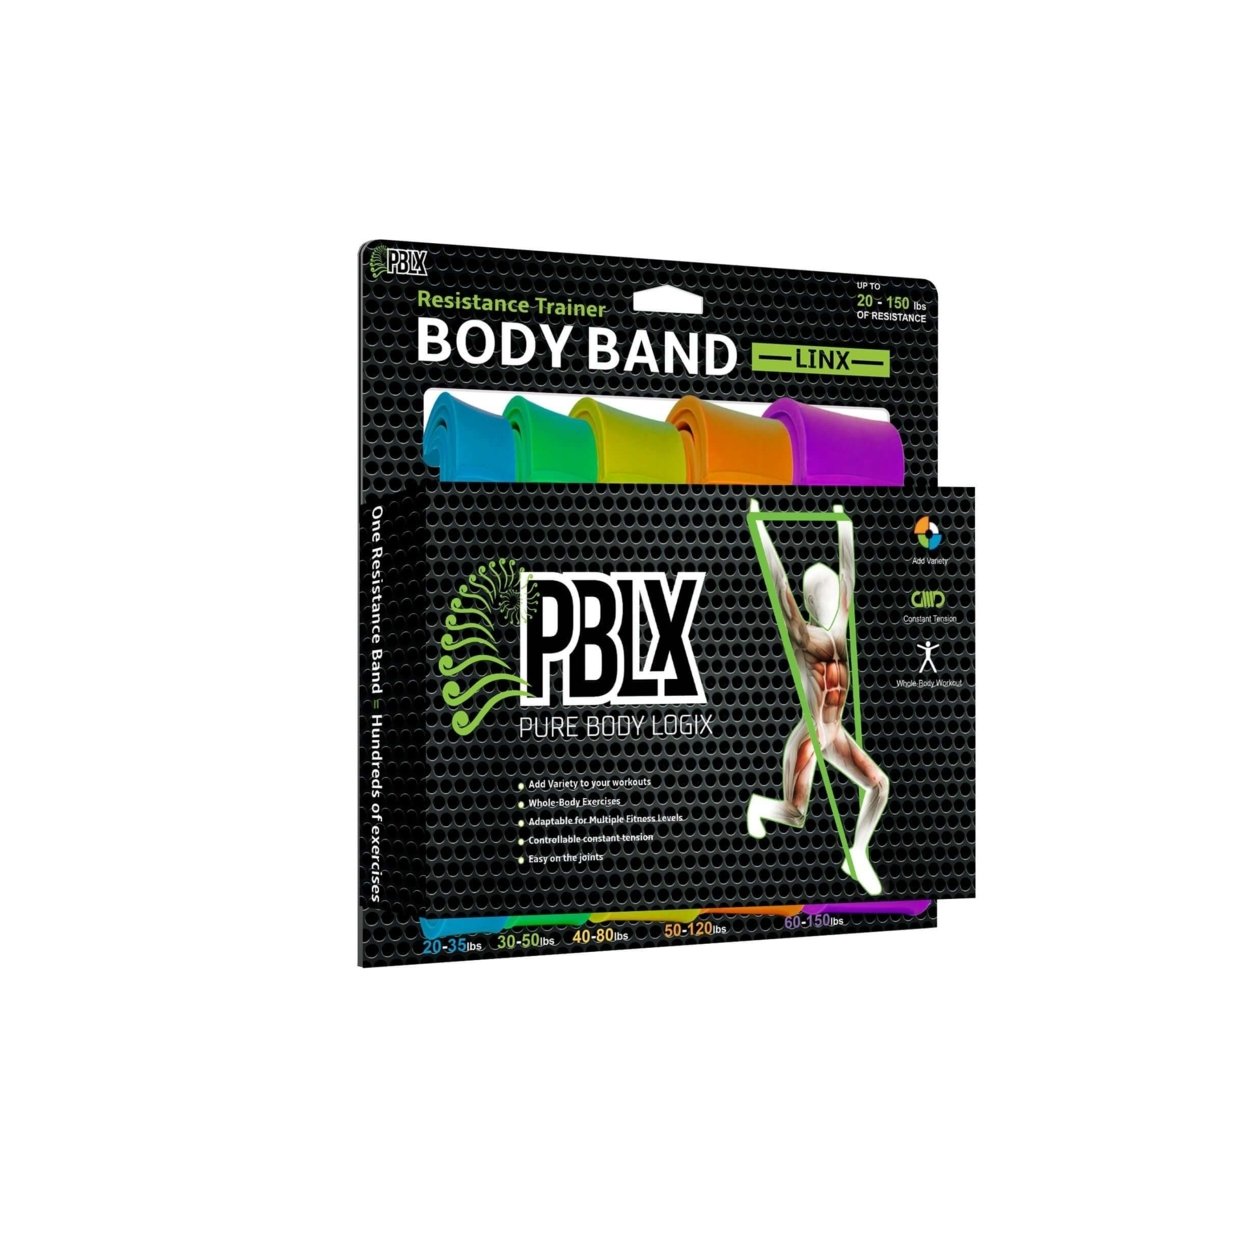 PBLX Deluxe Body Bands Bundle 20-150 Lbs